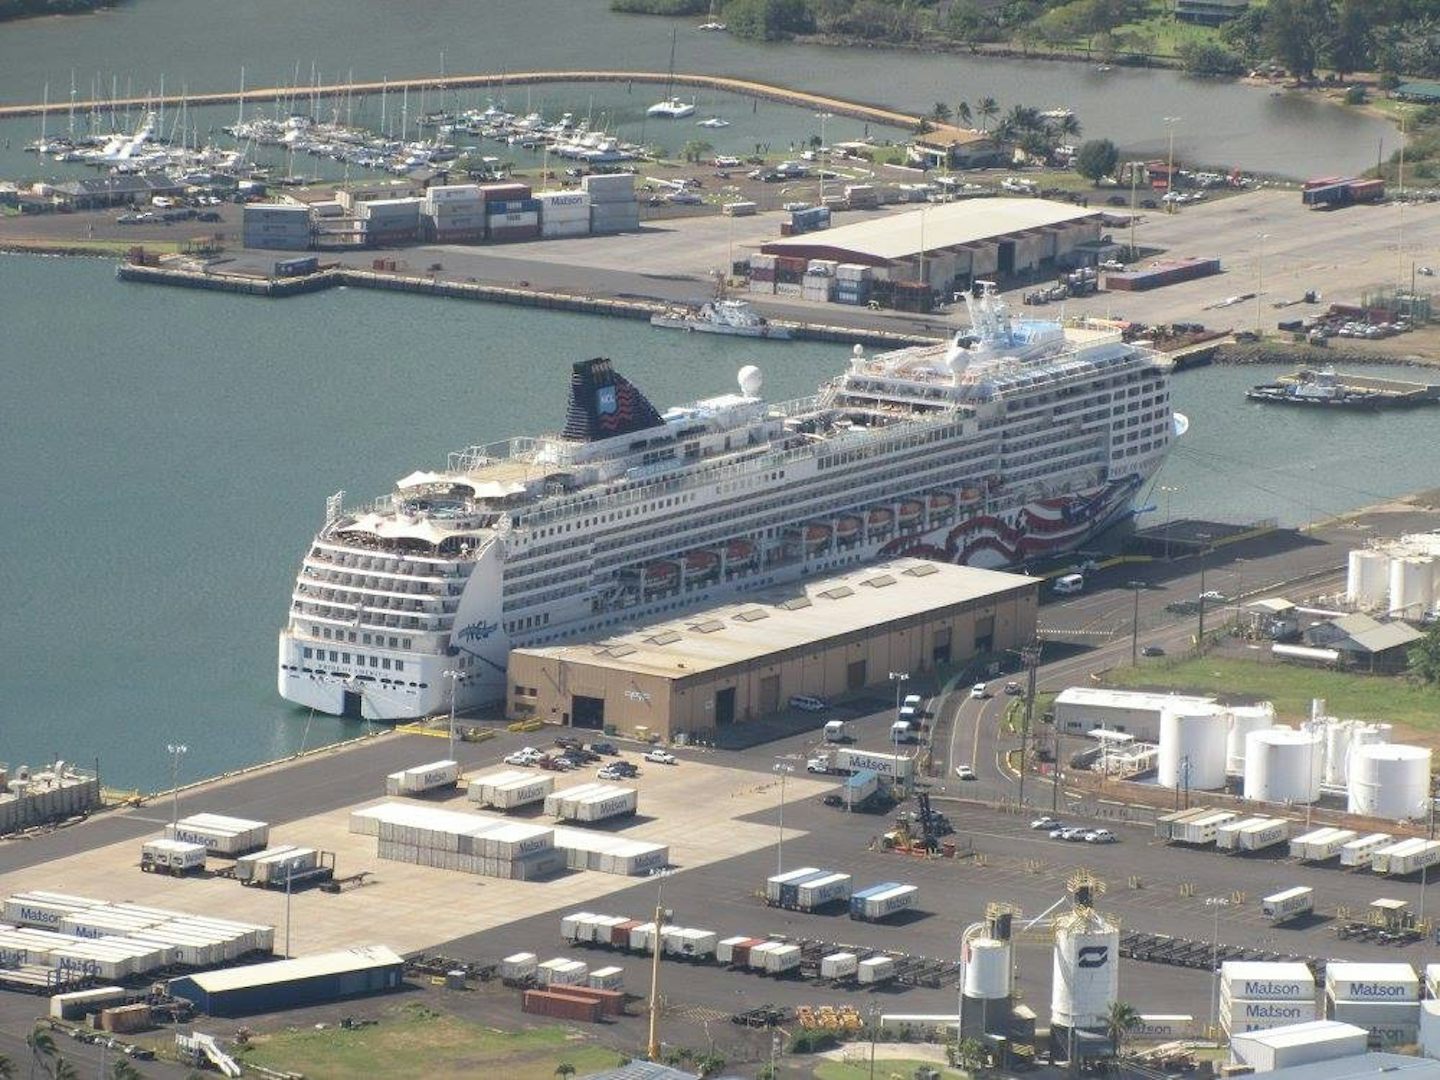 Ship docked at Kawai viewed from helicopter ride.